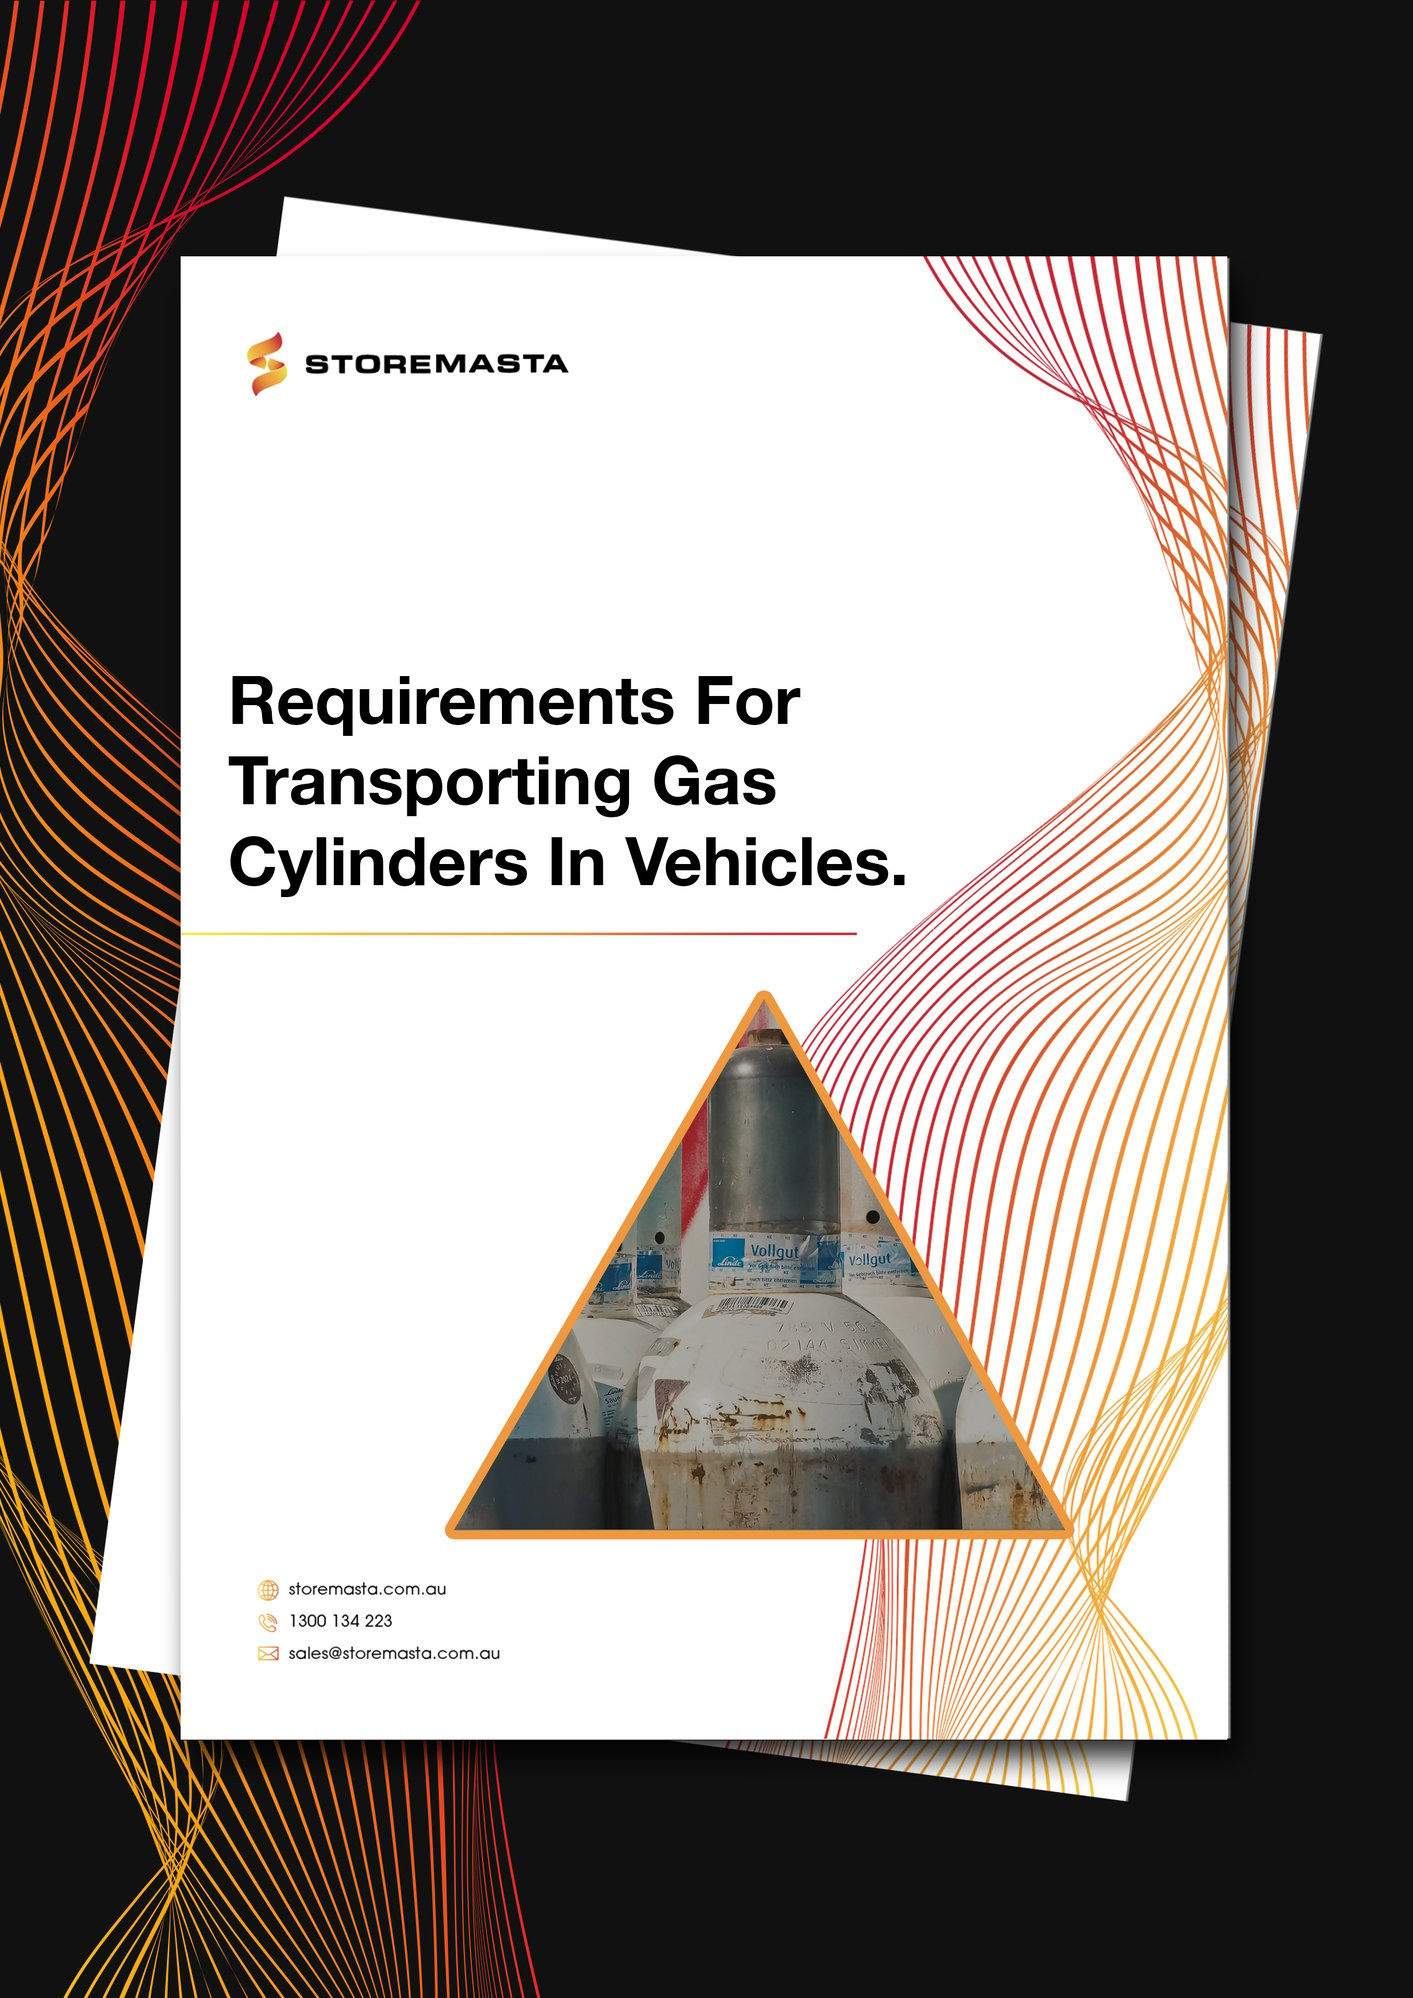 Requirements For Transporting Gas Cylinders In Vehicles.